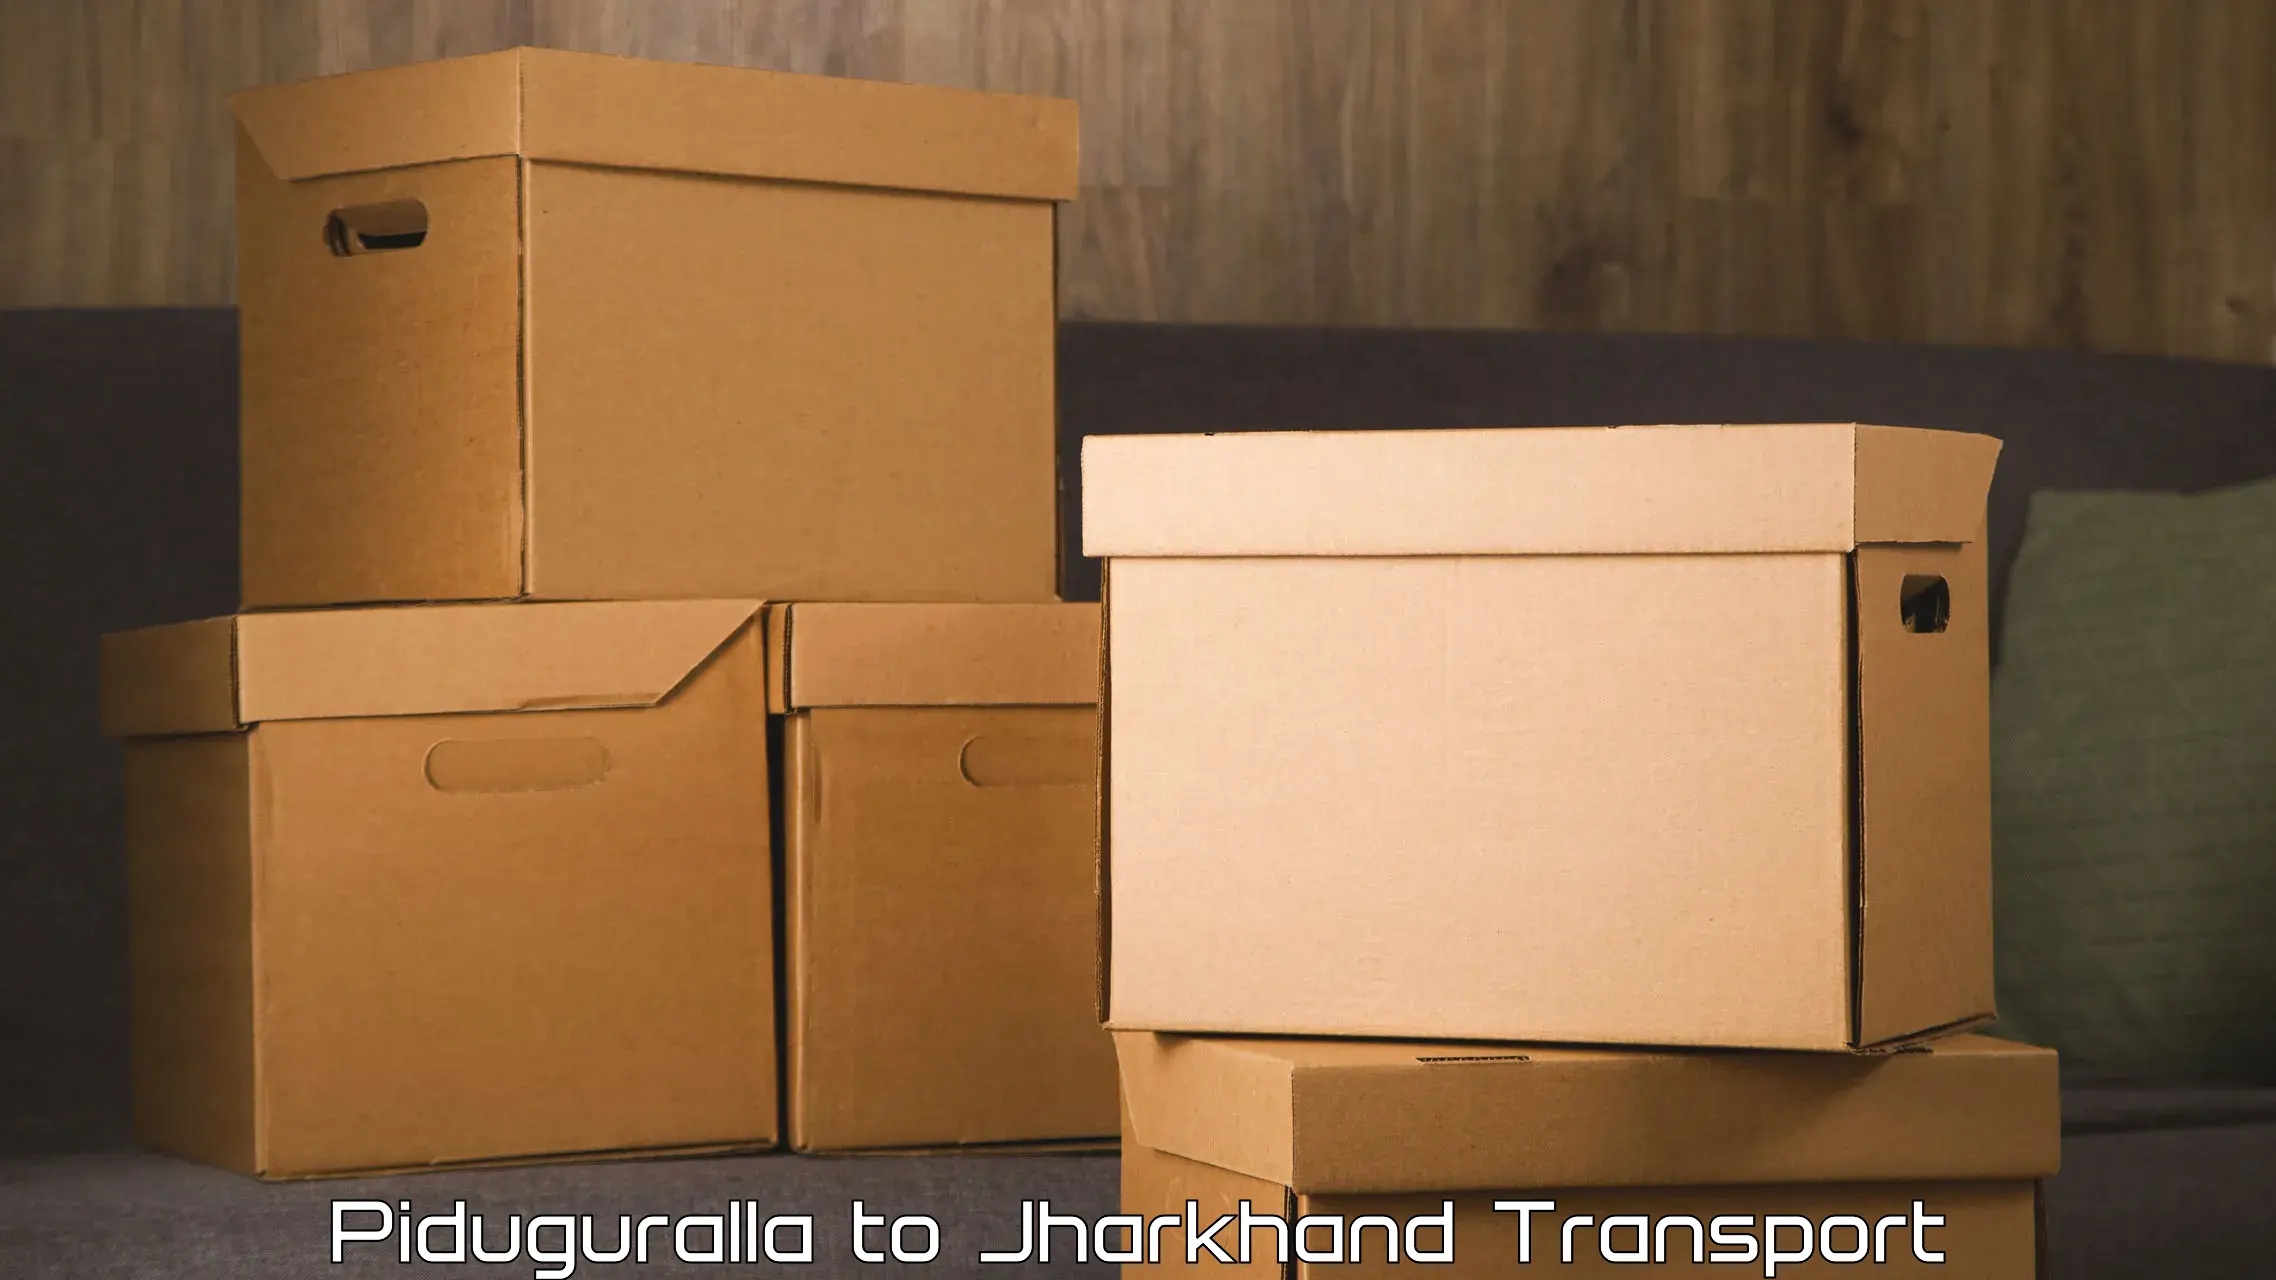 Container transport service Piduguralla to Jharkhand